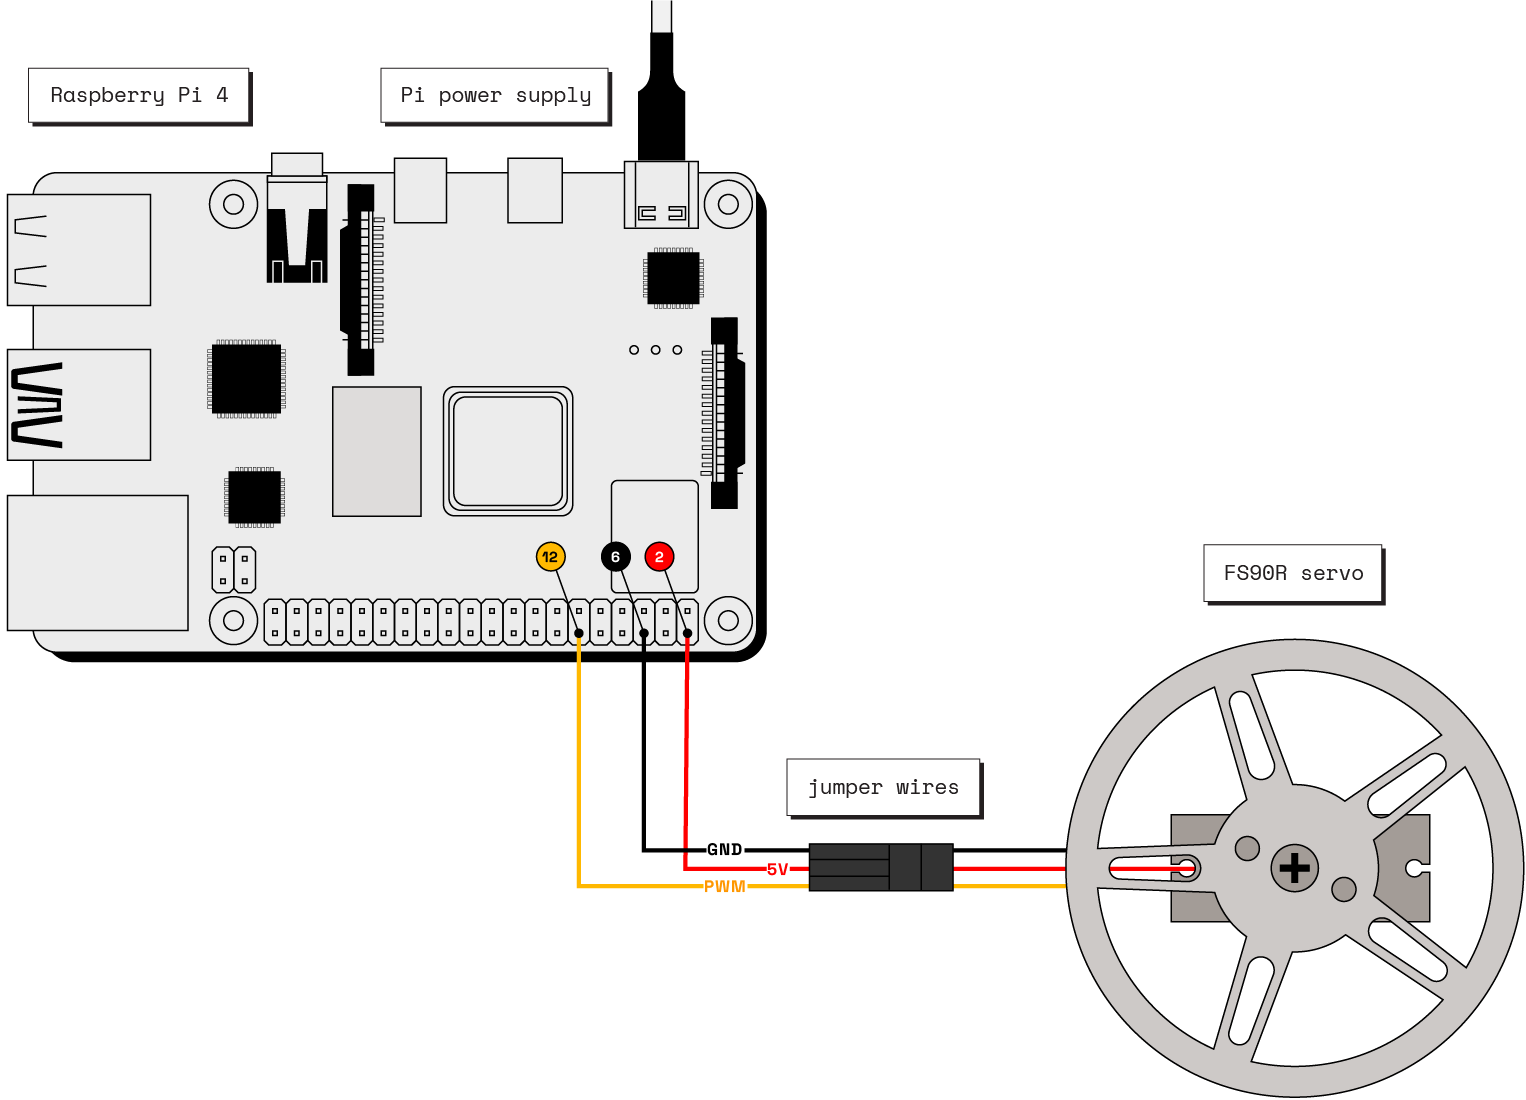 A Raspberry Pi connected to a FS90R servo. The yellow PWM wire is attached to pin twelve on the raspberry pi. The red five-volt wire is attached to pin two. The black ground wire is attached to pin eight